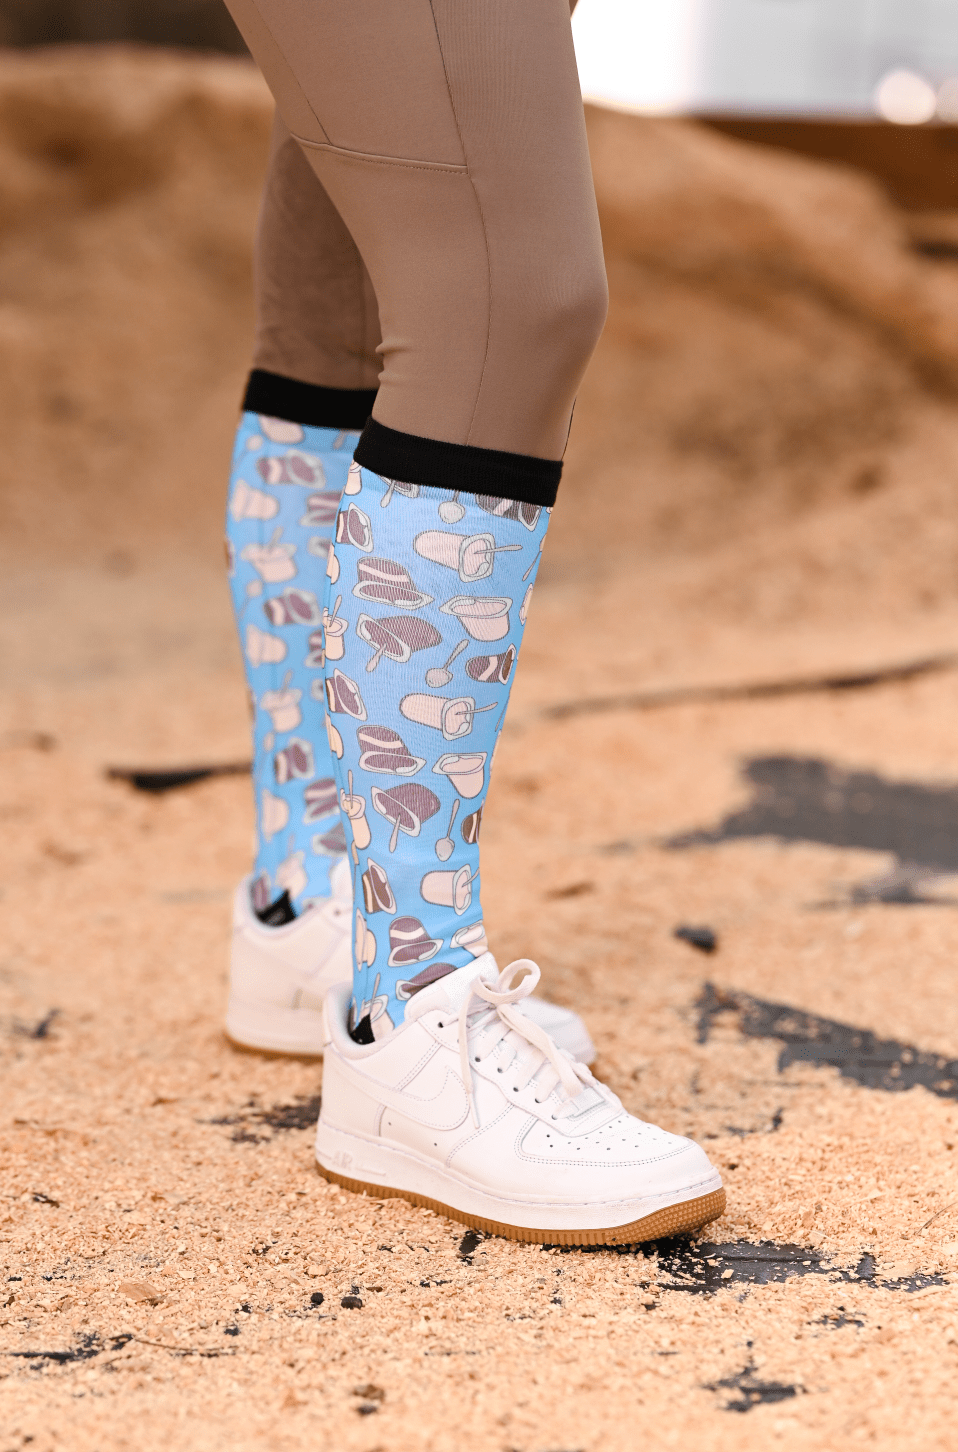 dreamers & schemers Pair & A Spare Pudding Cup Pair & a Spare equestrian boot socks boot socks thin socks riding socks pattern socks tall socks funny socks knee high socks horse socks horse show socks